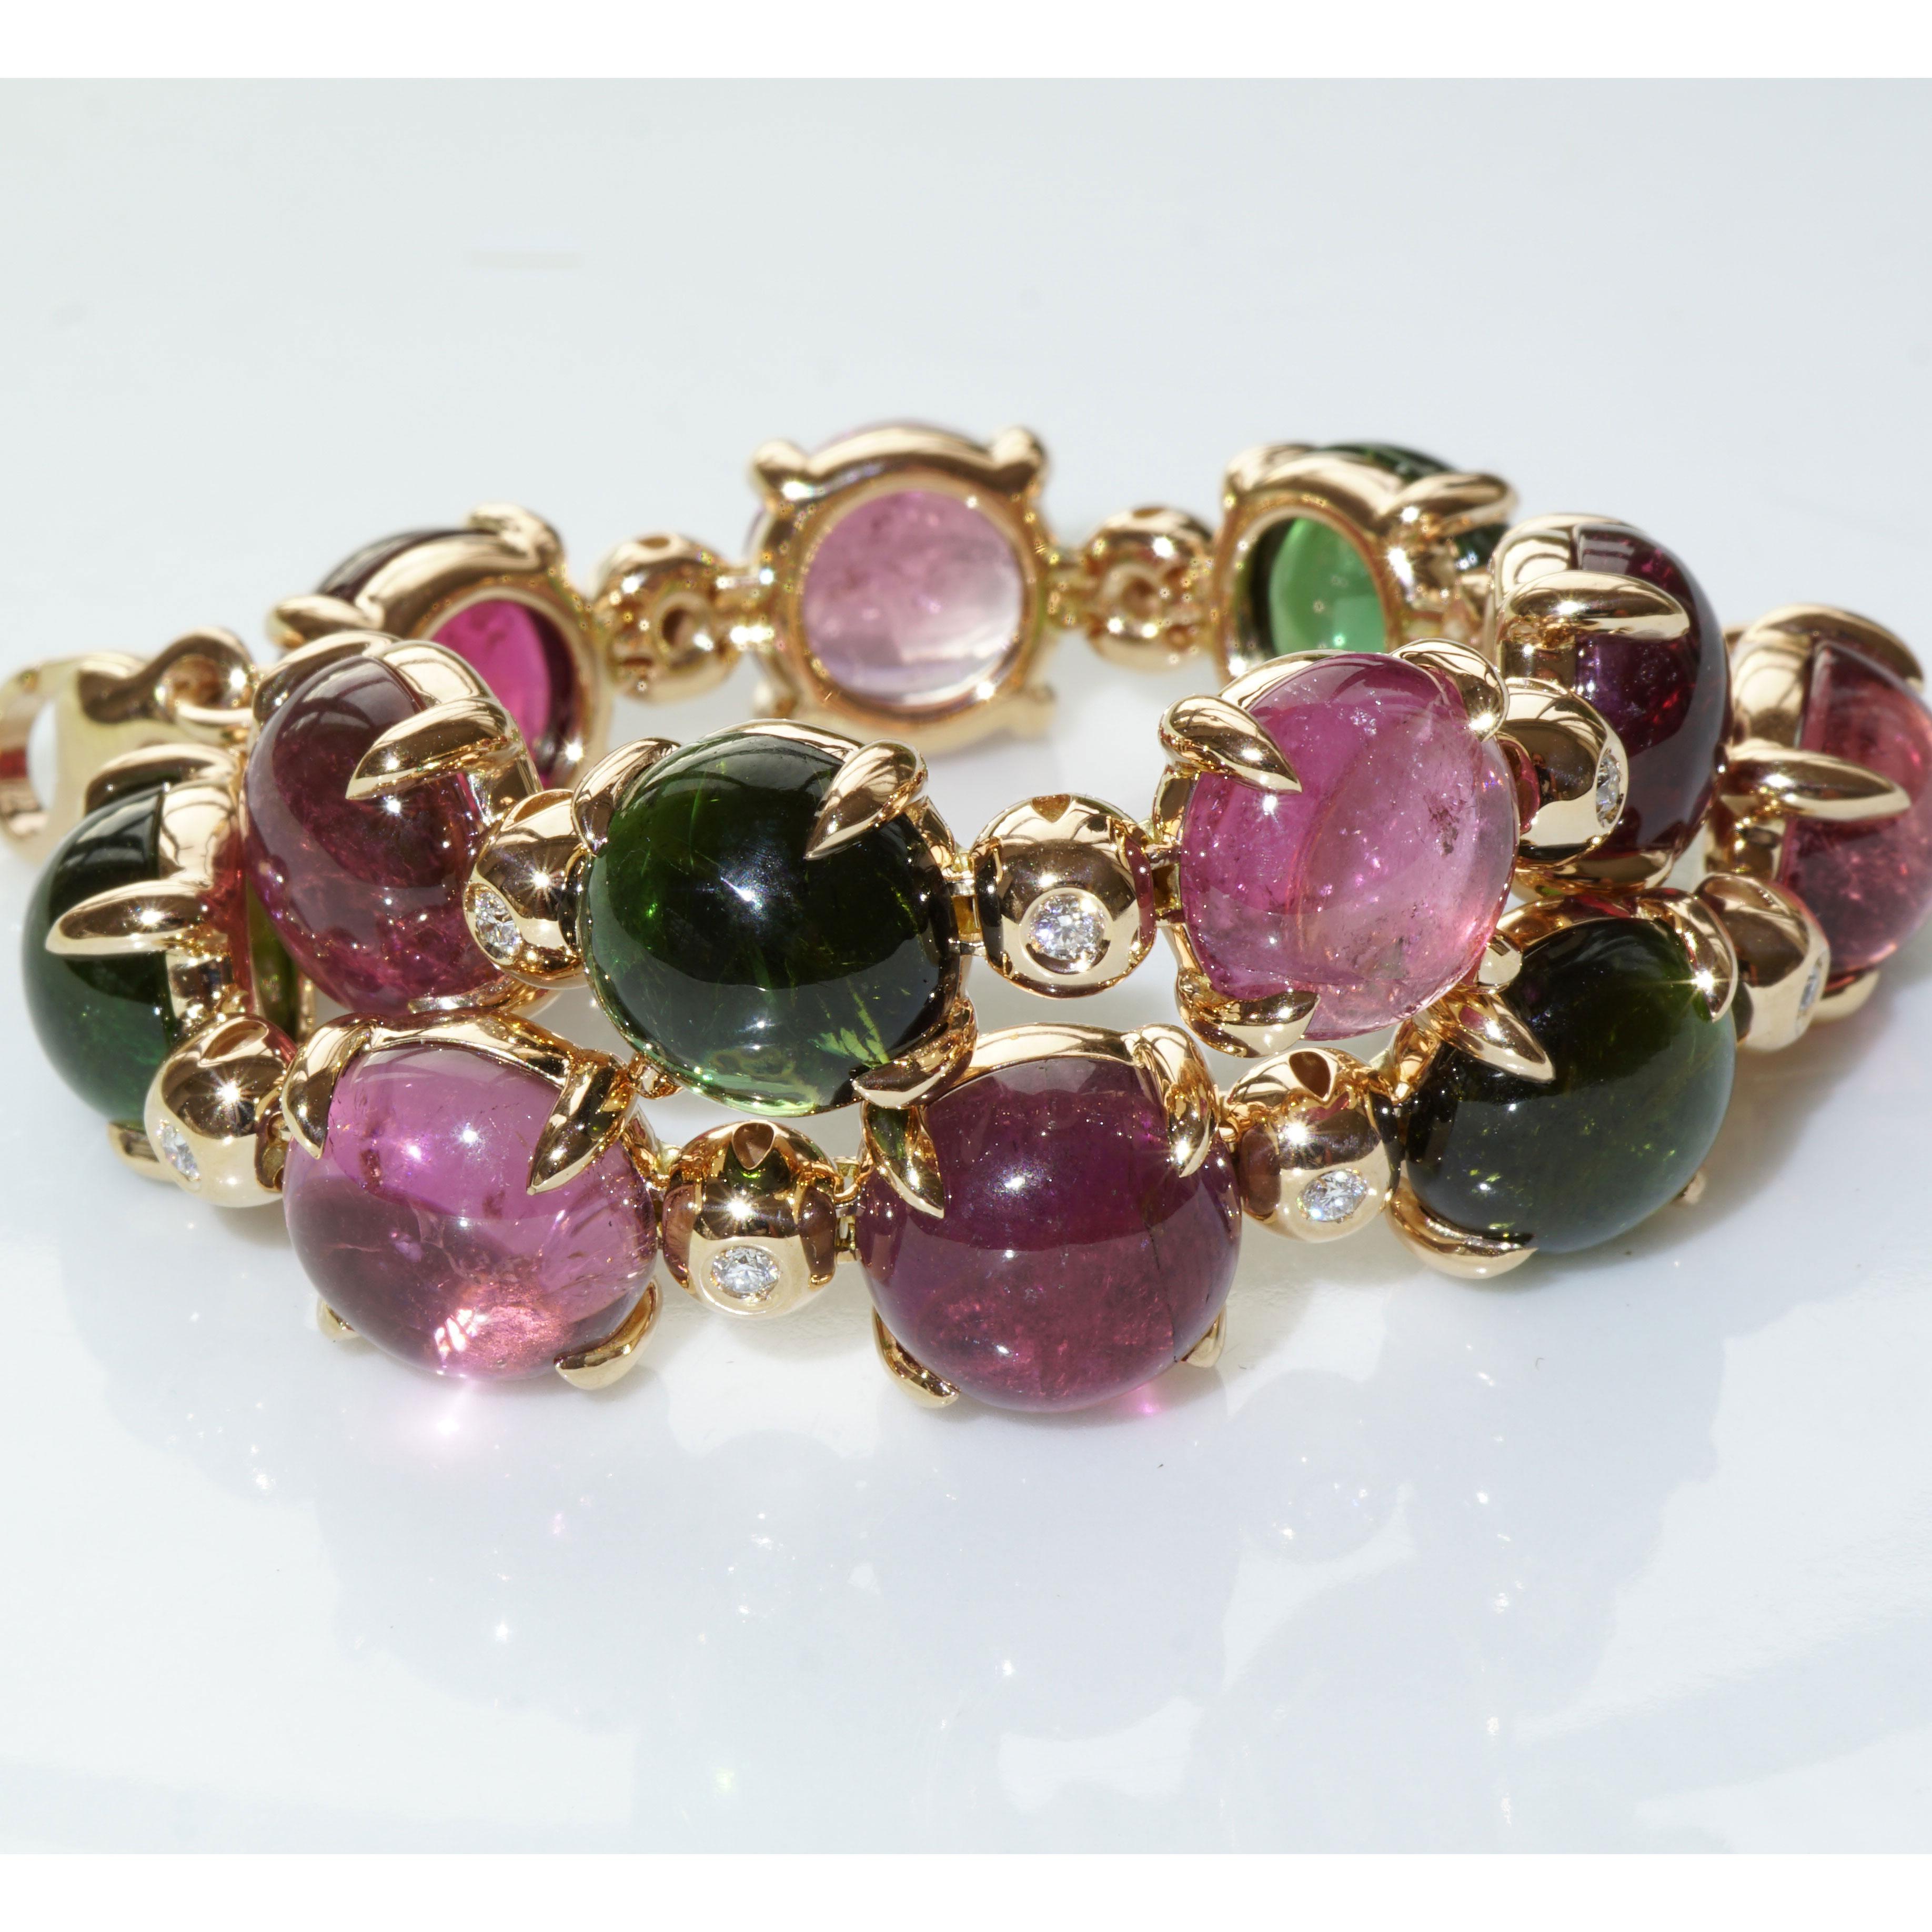 Modern Tourmaline Bracelet Multicolor 50 Ct Transparency and Luminosity TOP 18kt In New Condition For Sale In Viena, Viena